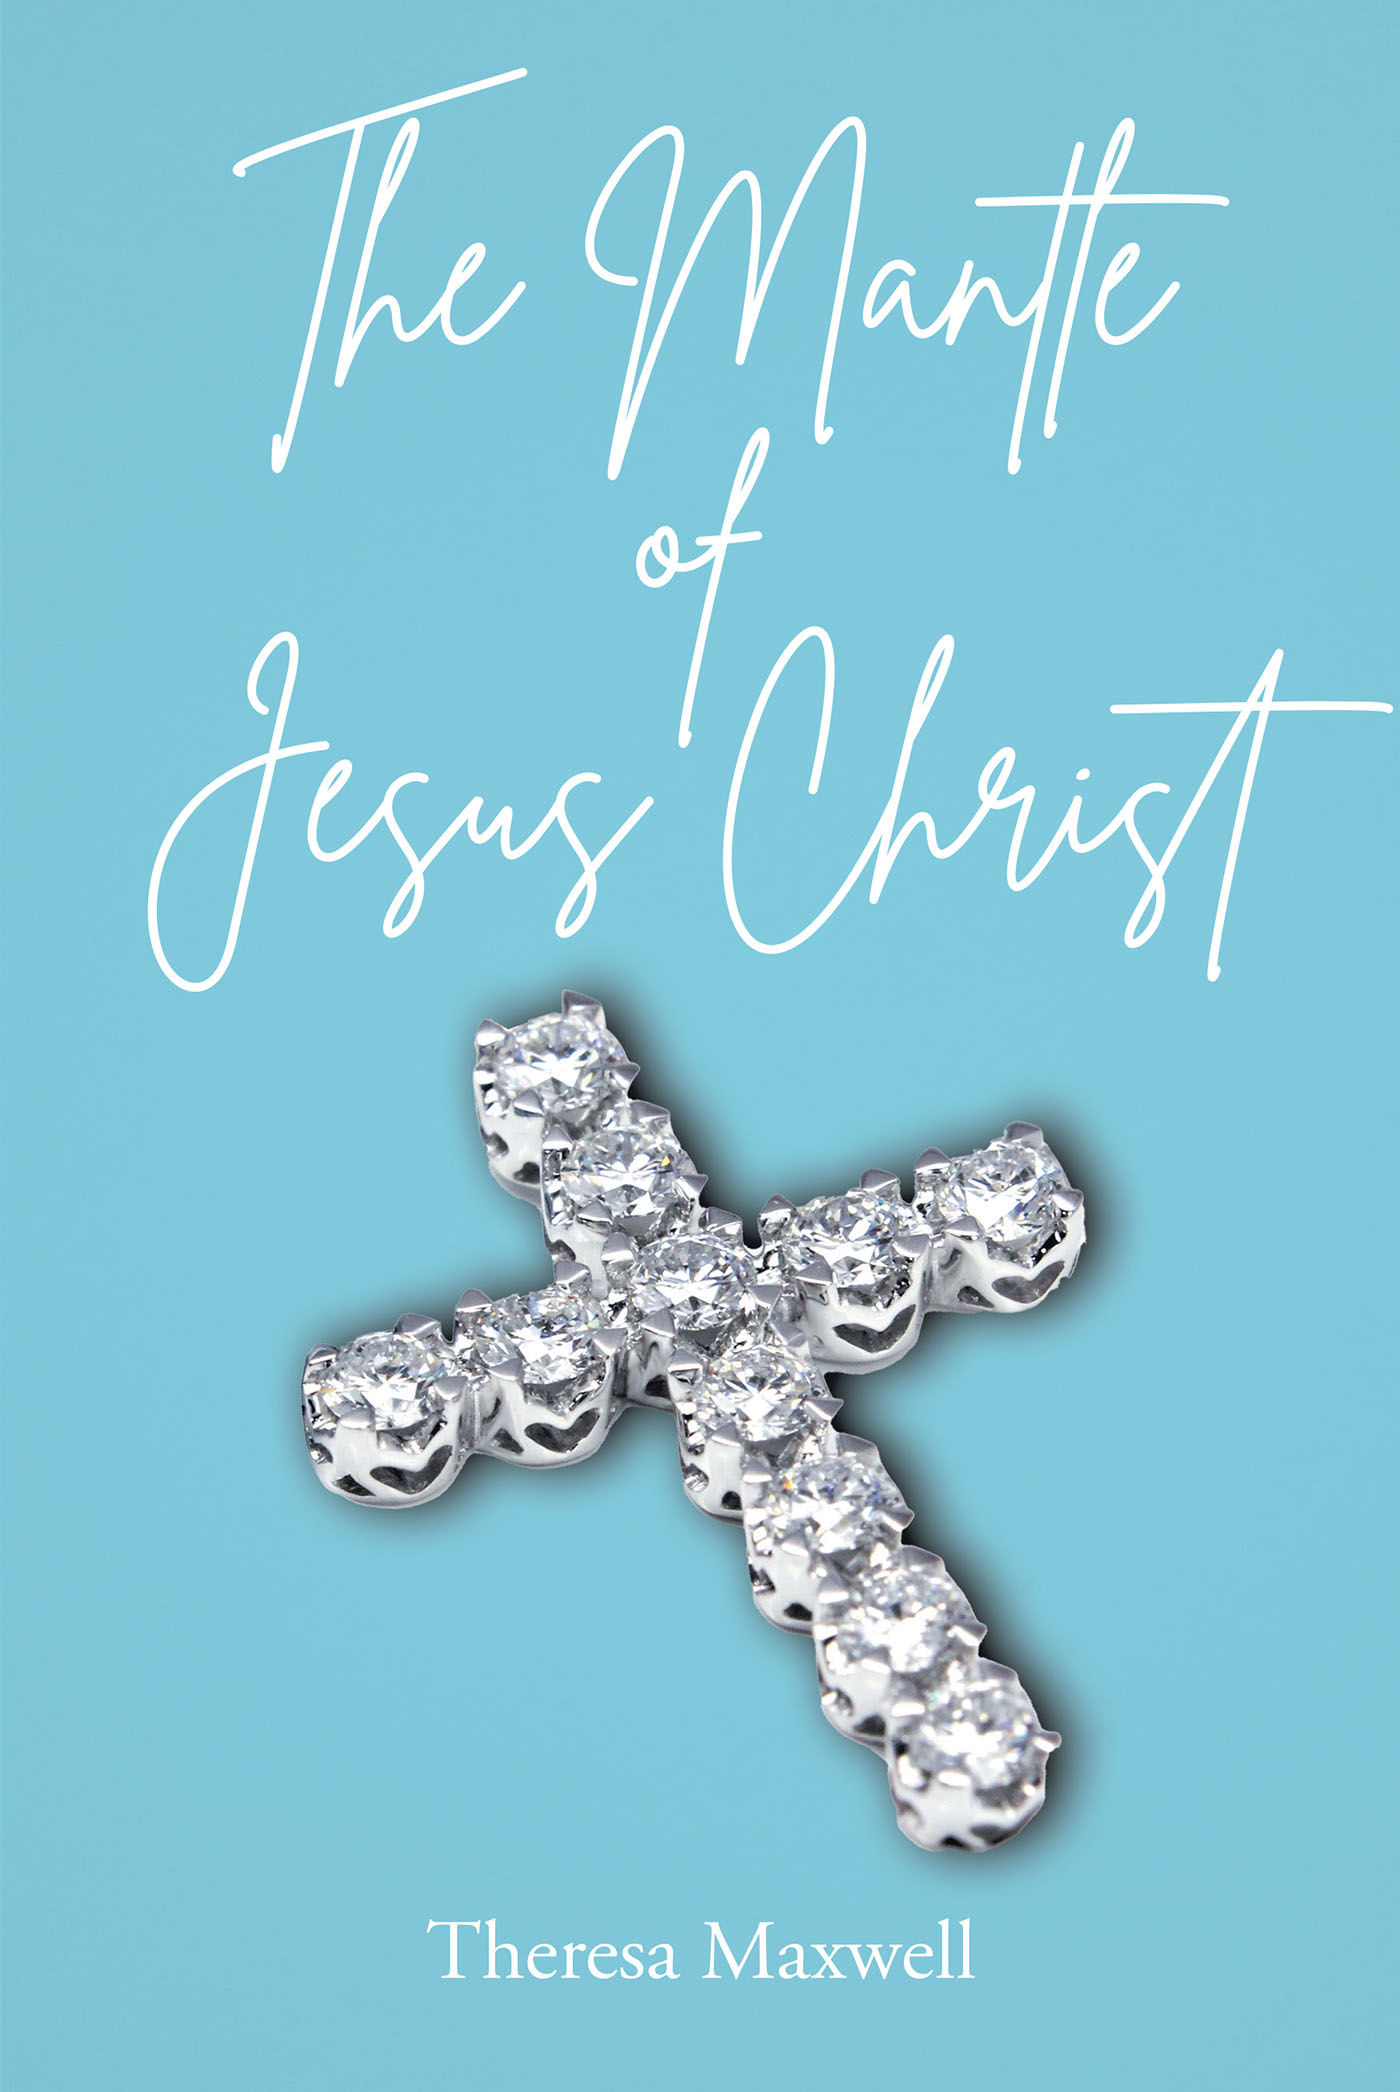 Theresa Maxwell’s Newly Released "The Mantle of Jesus Christ" is an Empowering Guide to Spiritual Enlightenment